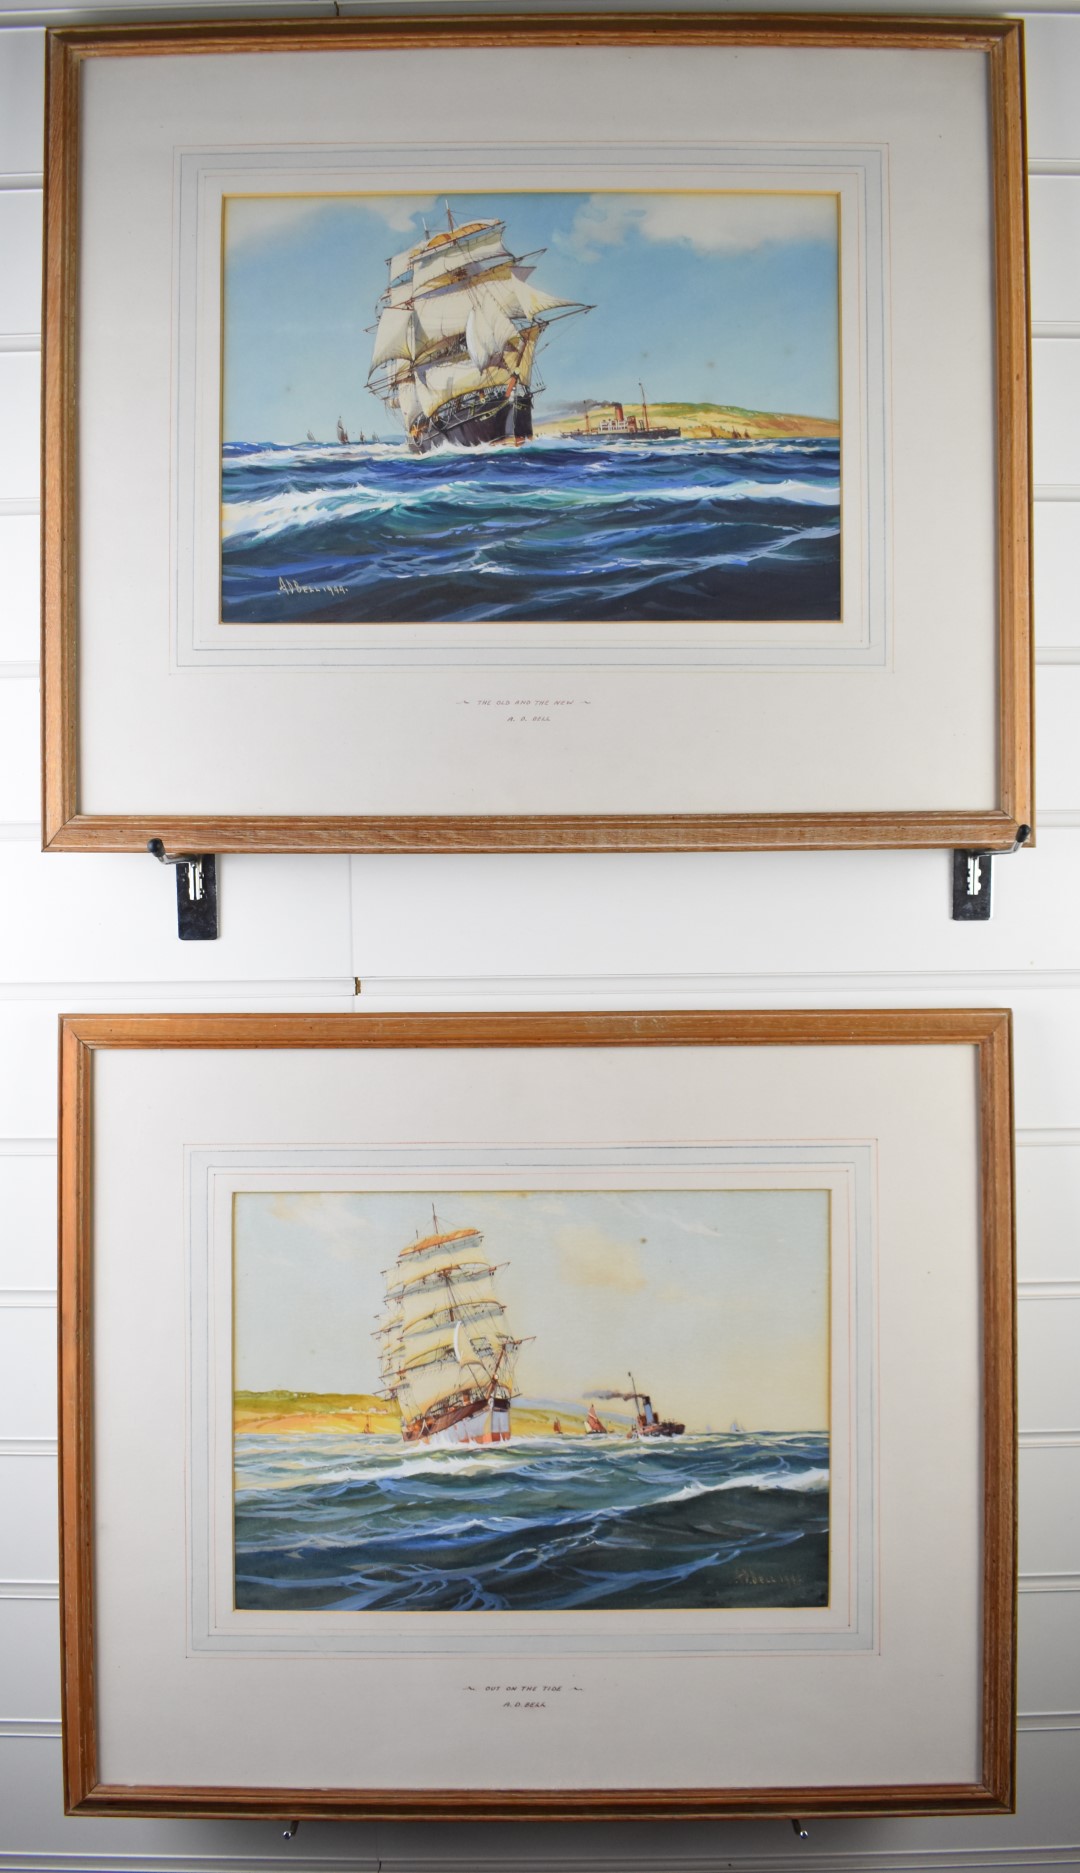 A D Bell (1884-1966, pseudonym for Wilfred Knox) pair of watercolours of maritime scenes 'Out on the